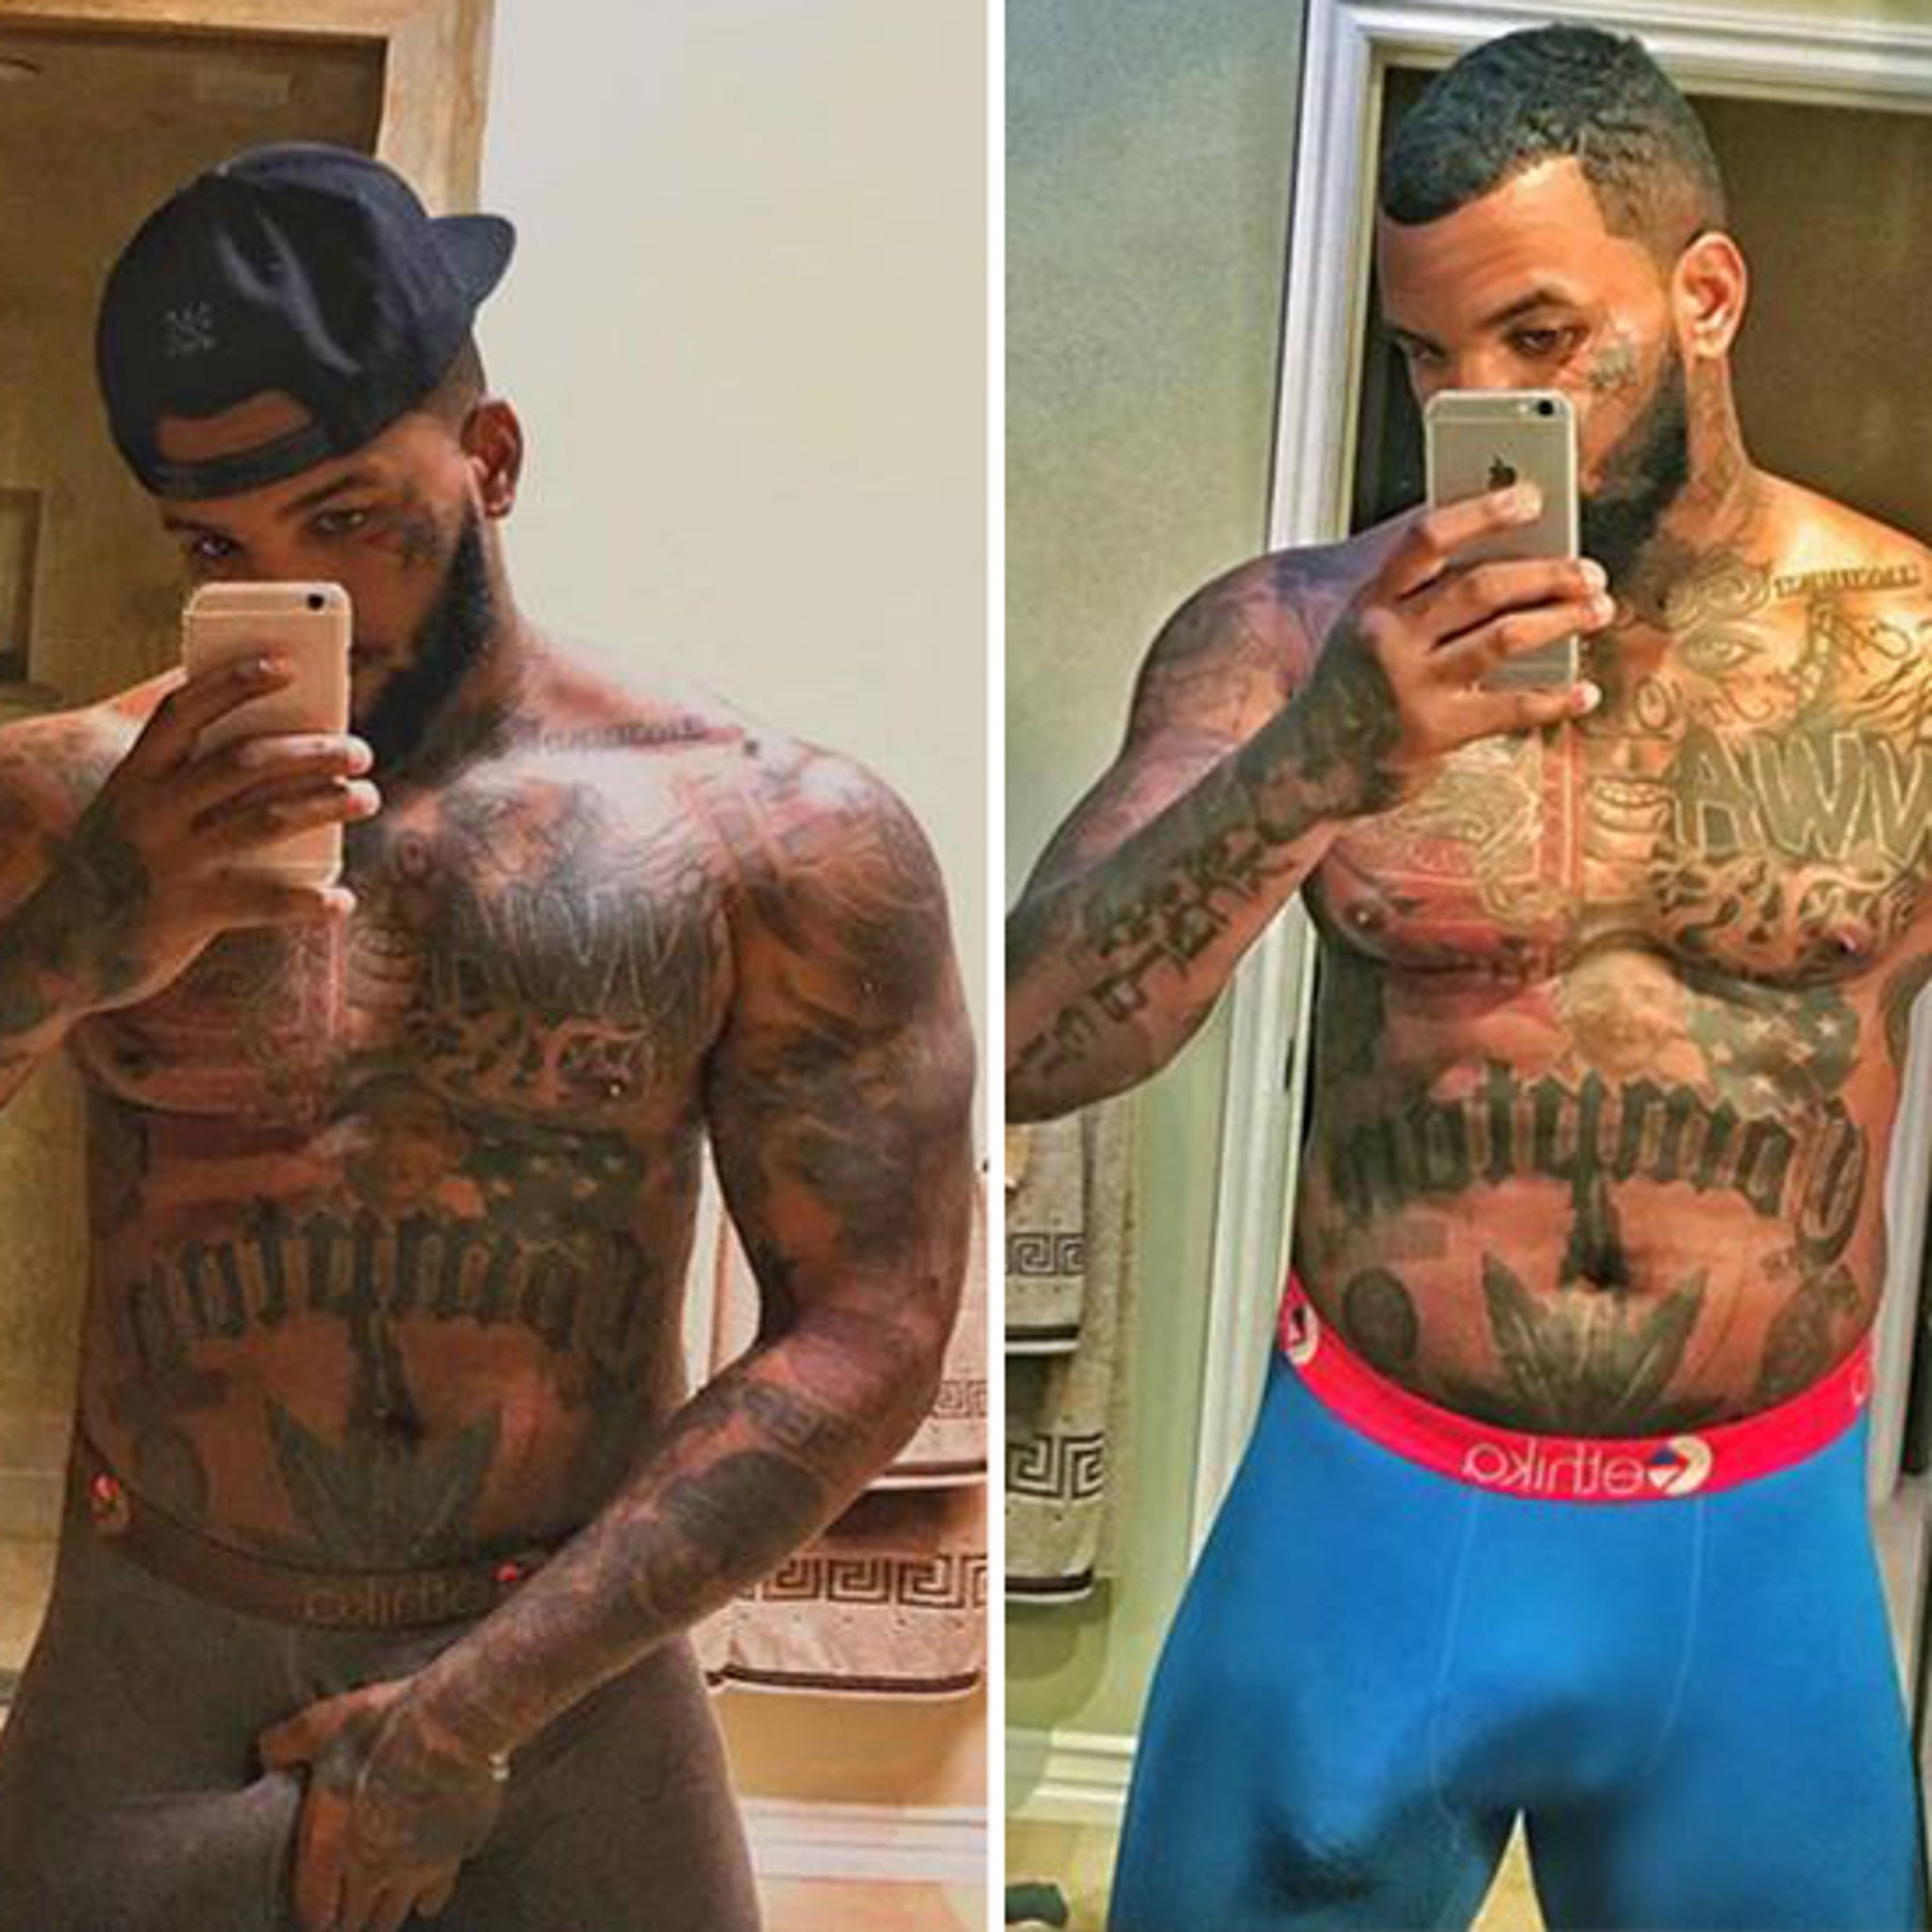 The game dick.pic